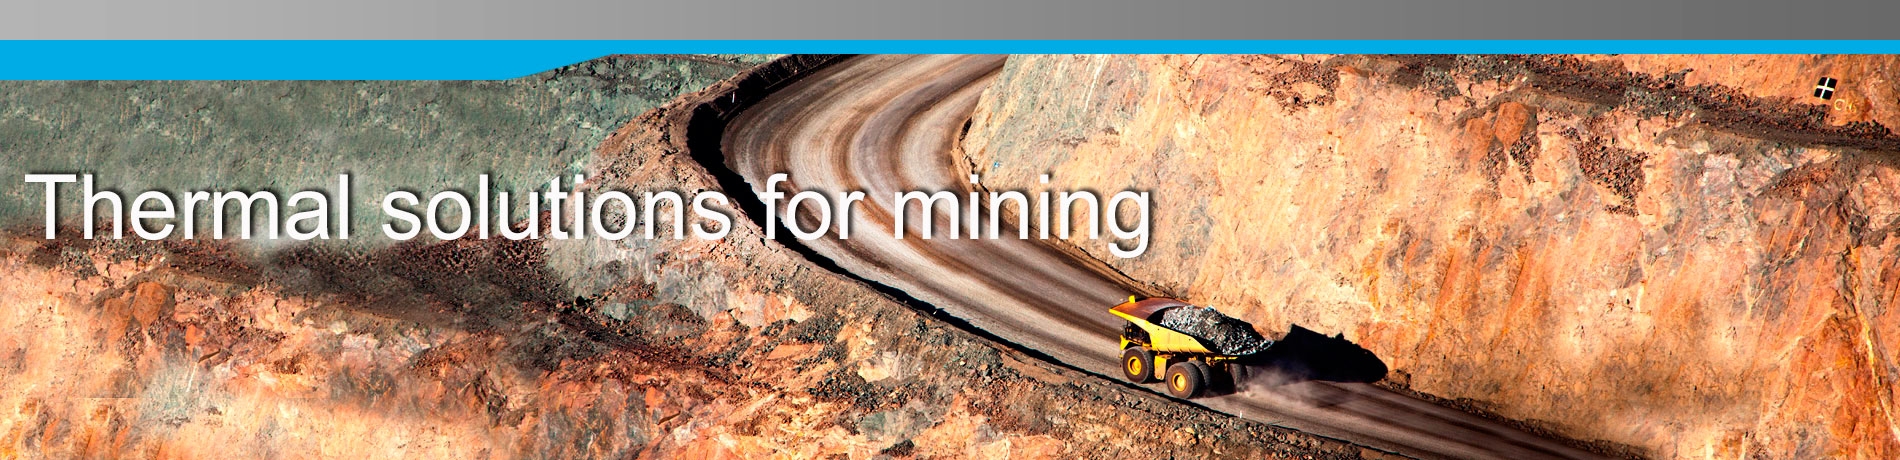 THERMAL SOLUTIONS FOR MINING